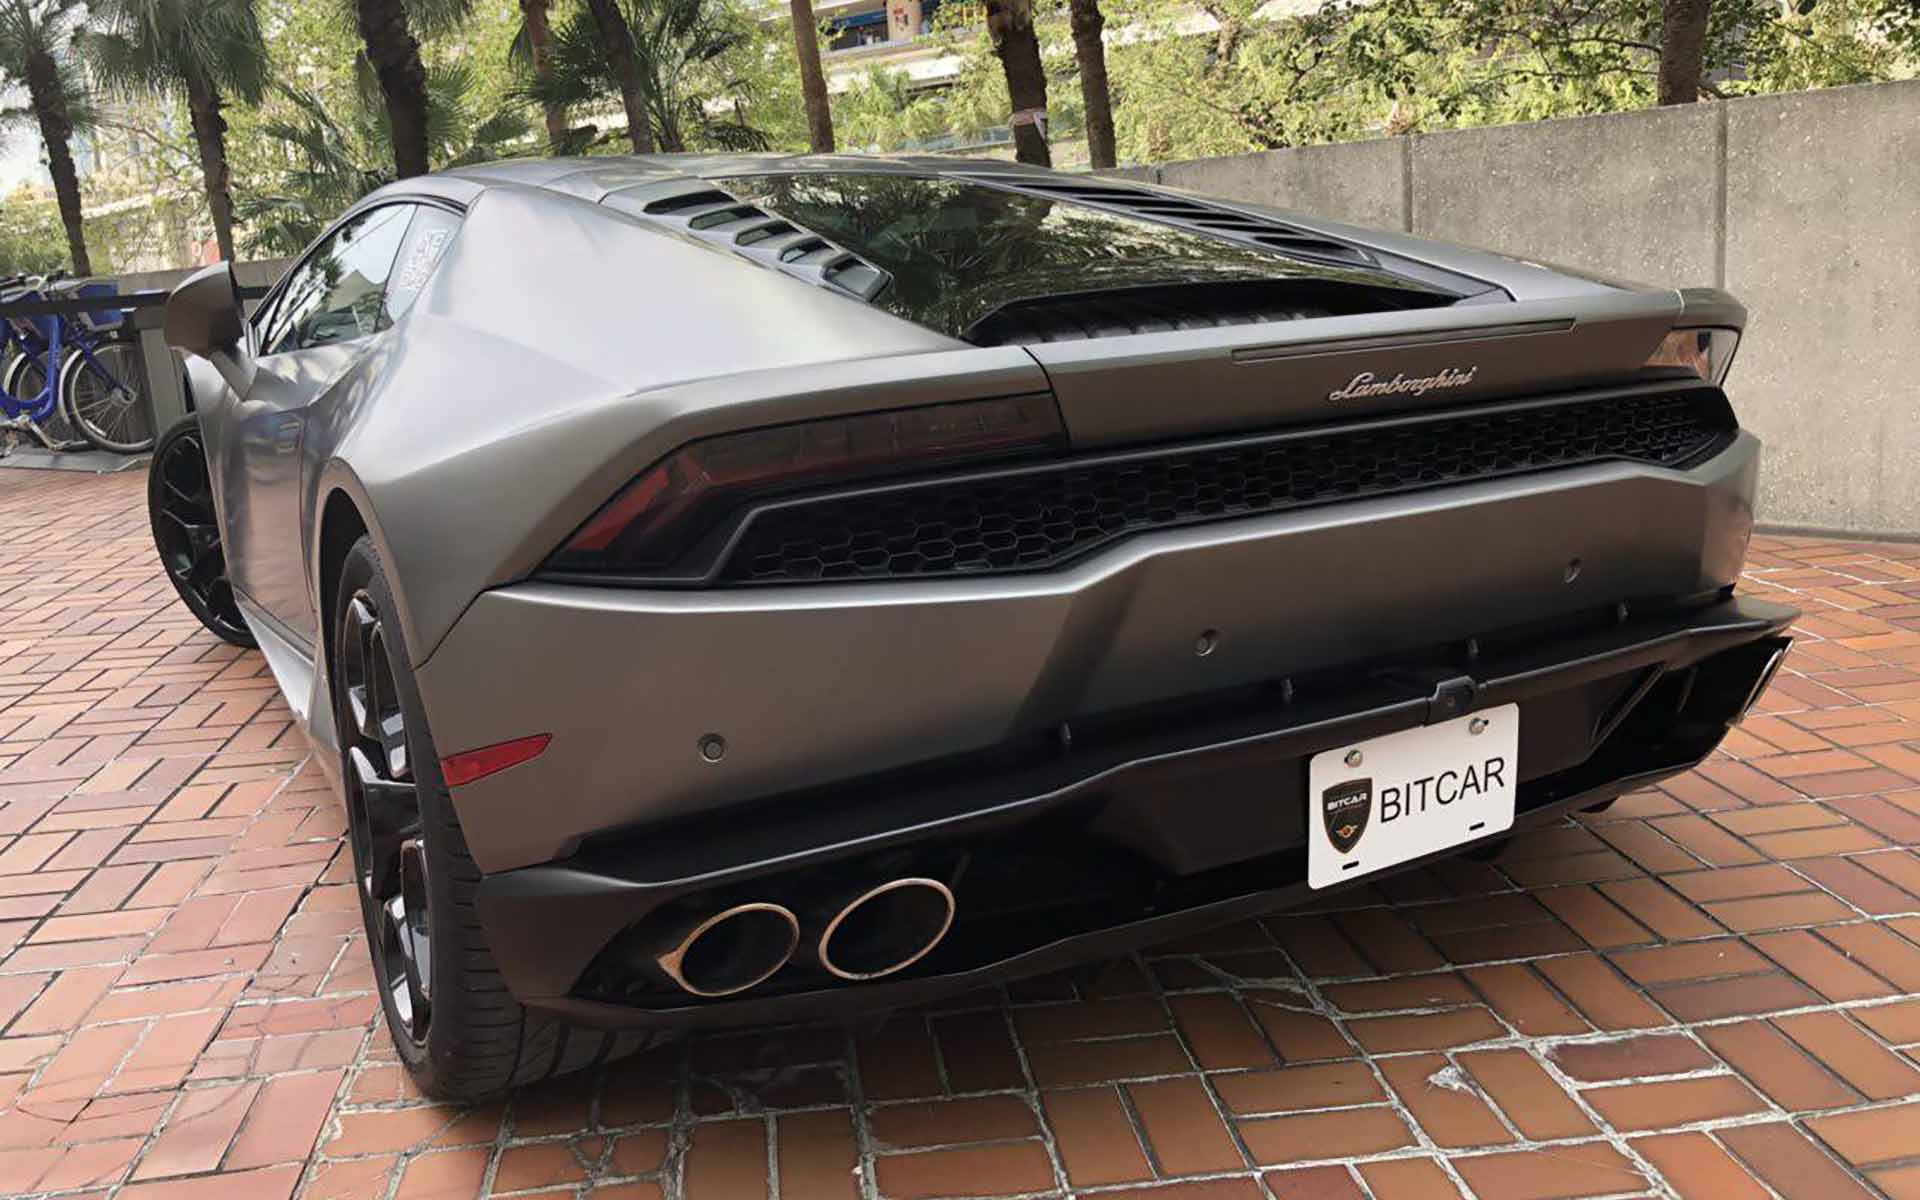 Bitcar Model Allows Users the Ability to Trade Their Way to Full Car Ownership